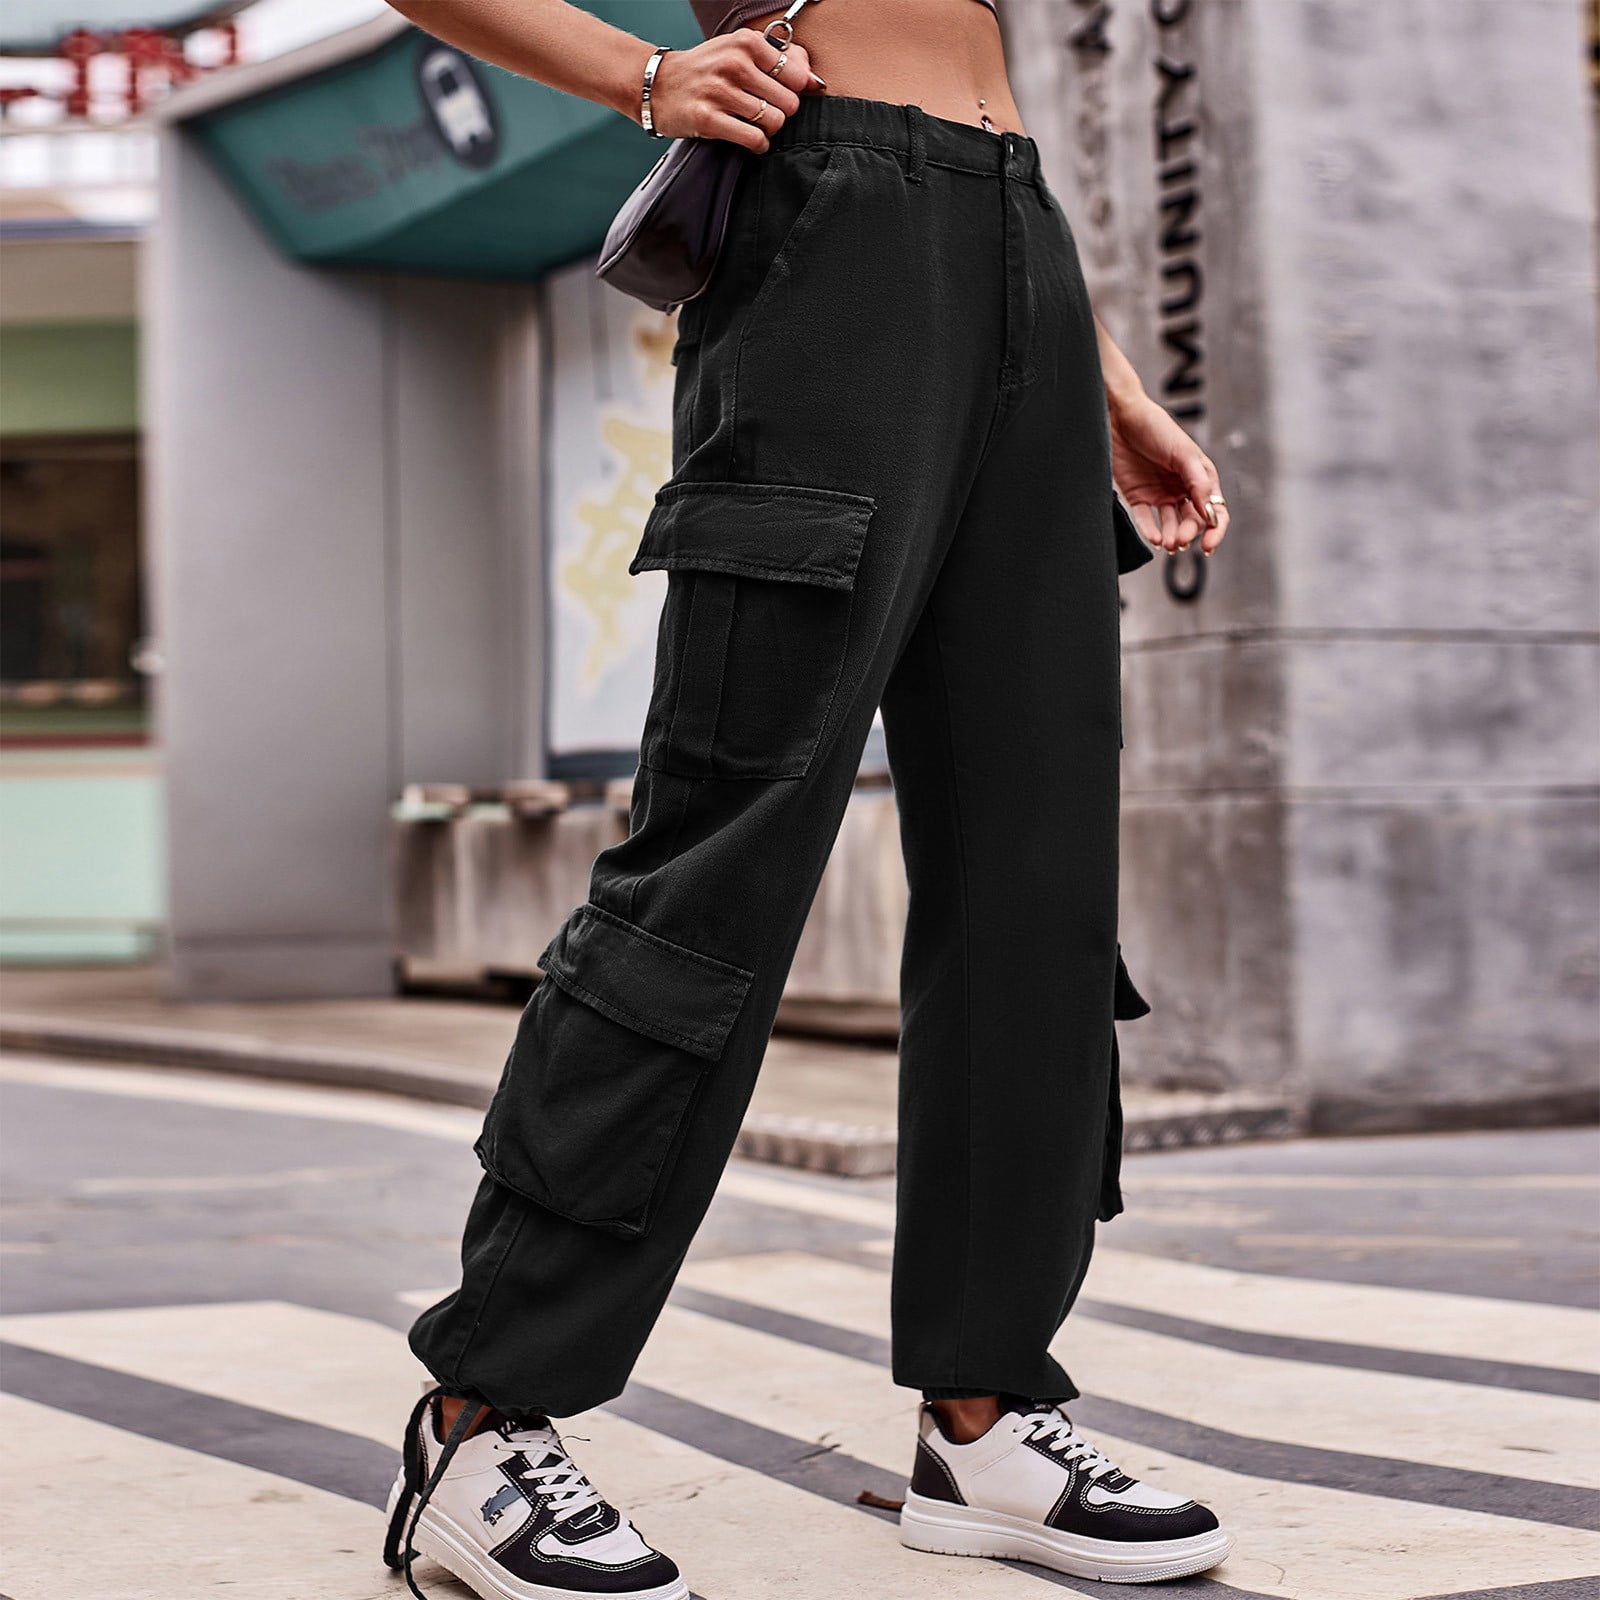 HIMIWAY Cargo Pants Women Palazzo Pants for Women Women's Fashion Casual  Solid Color Drawstring Jeans Overalls Sports Pants Black E S 